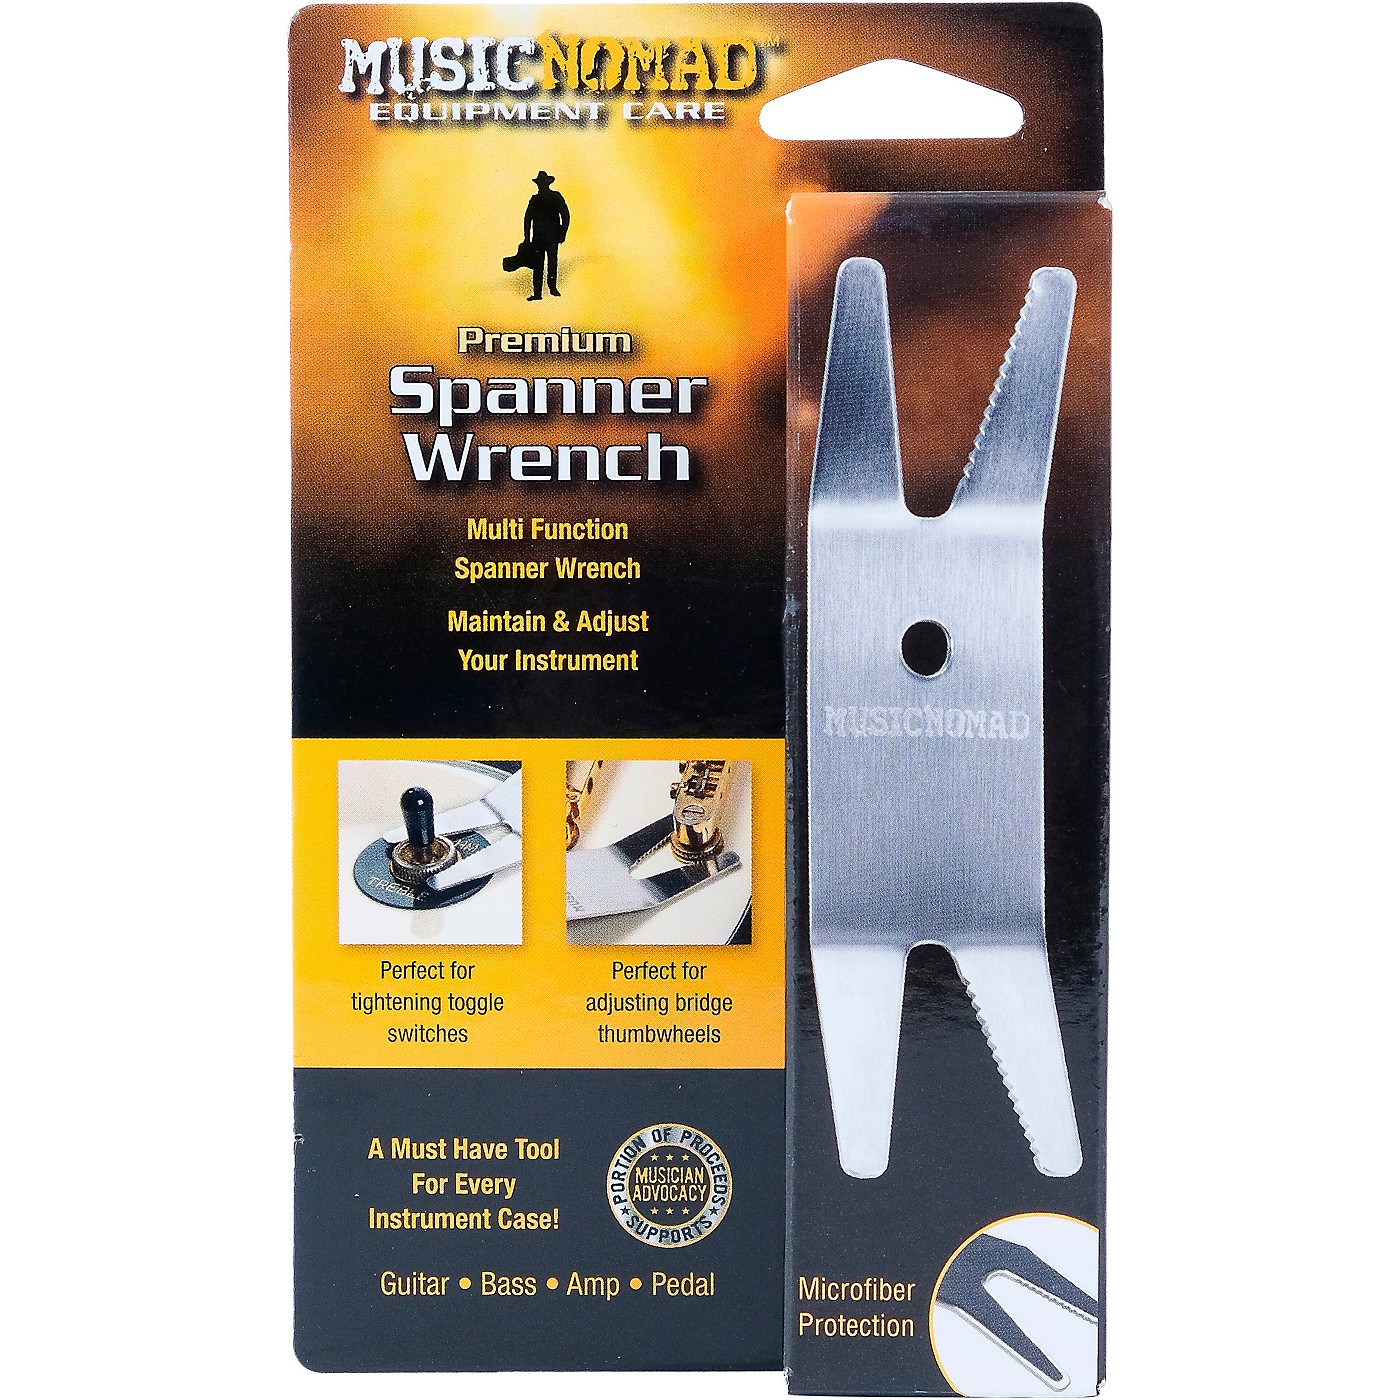 Music Nomad Premium Spanner Wrench With Microfiber thumbnail